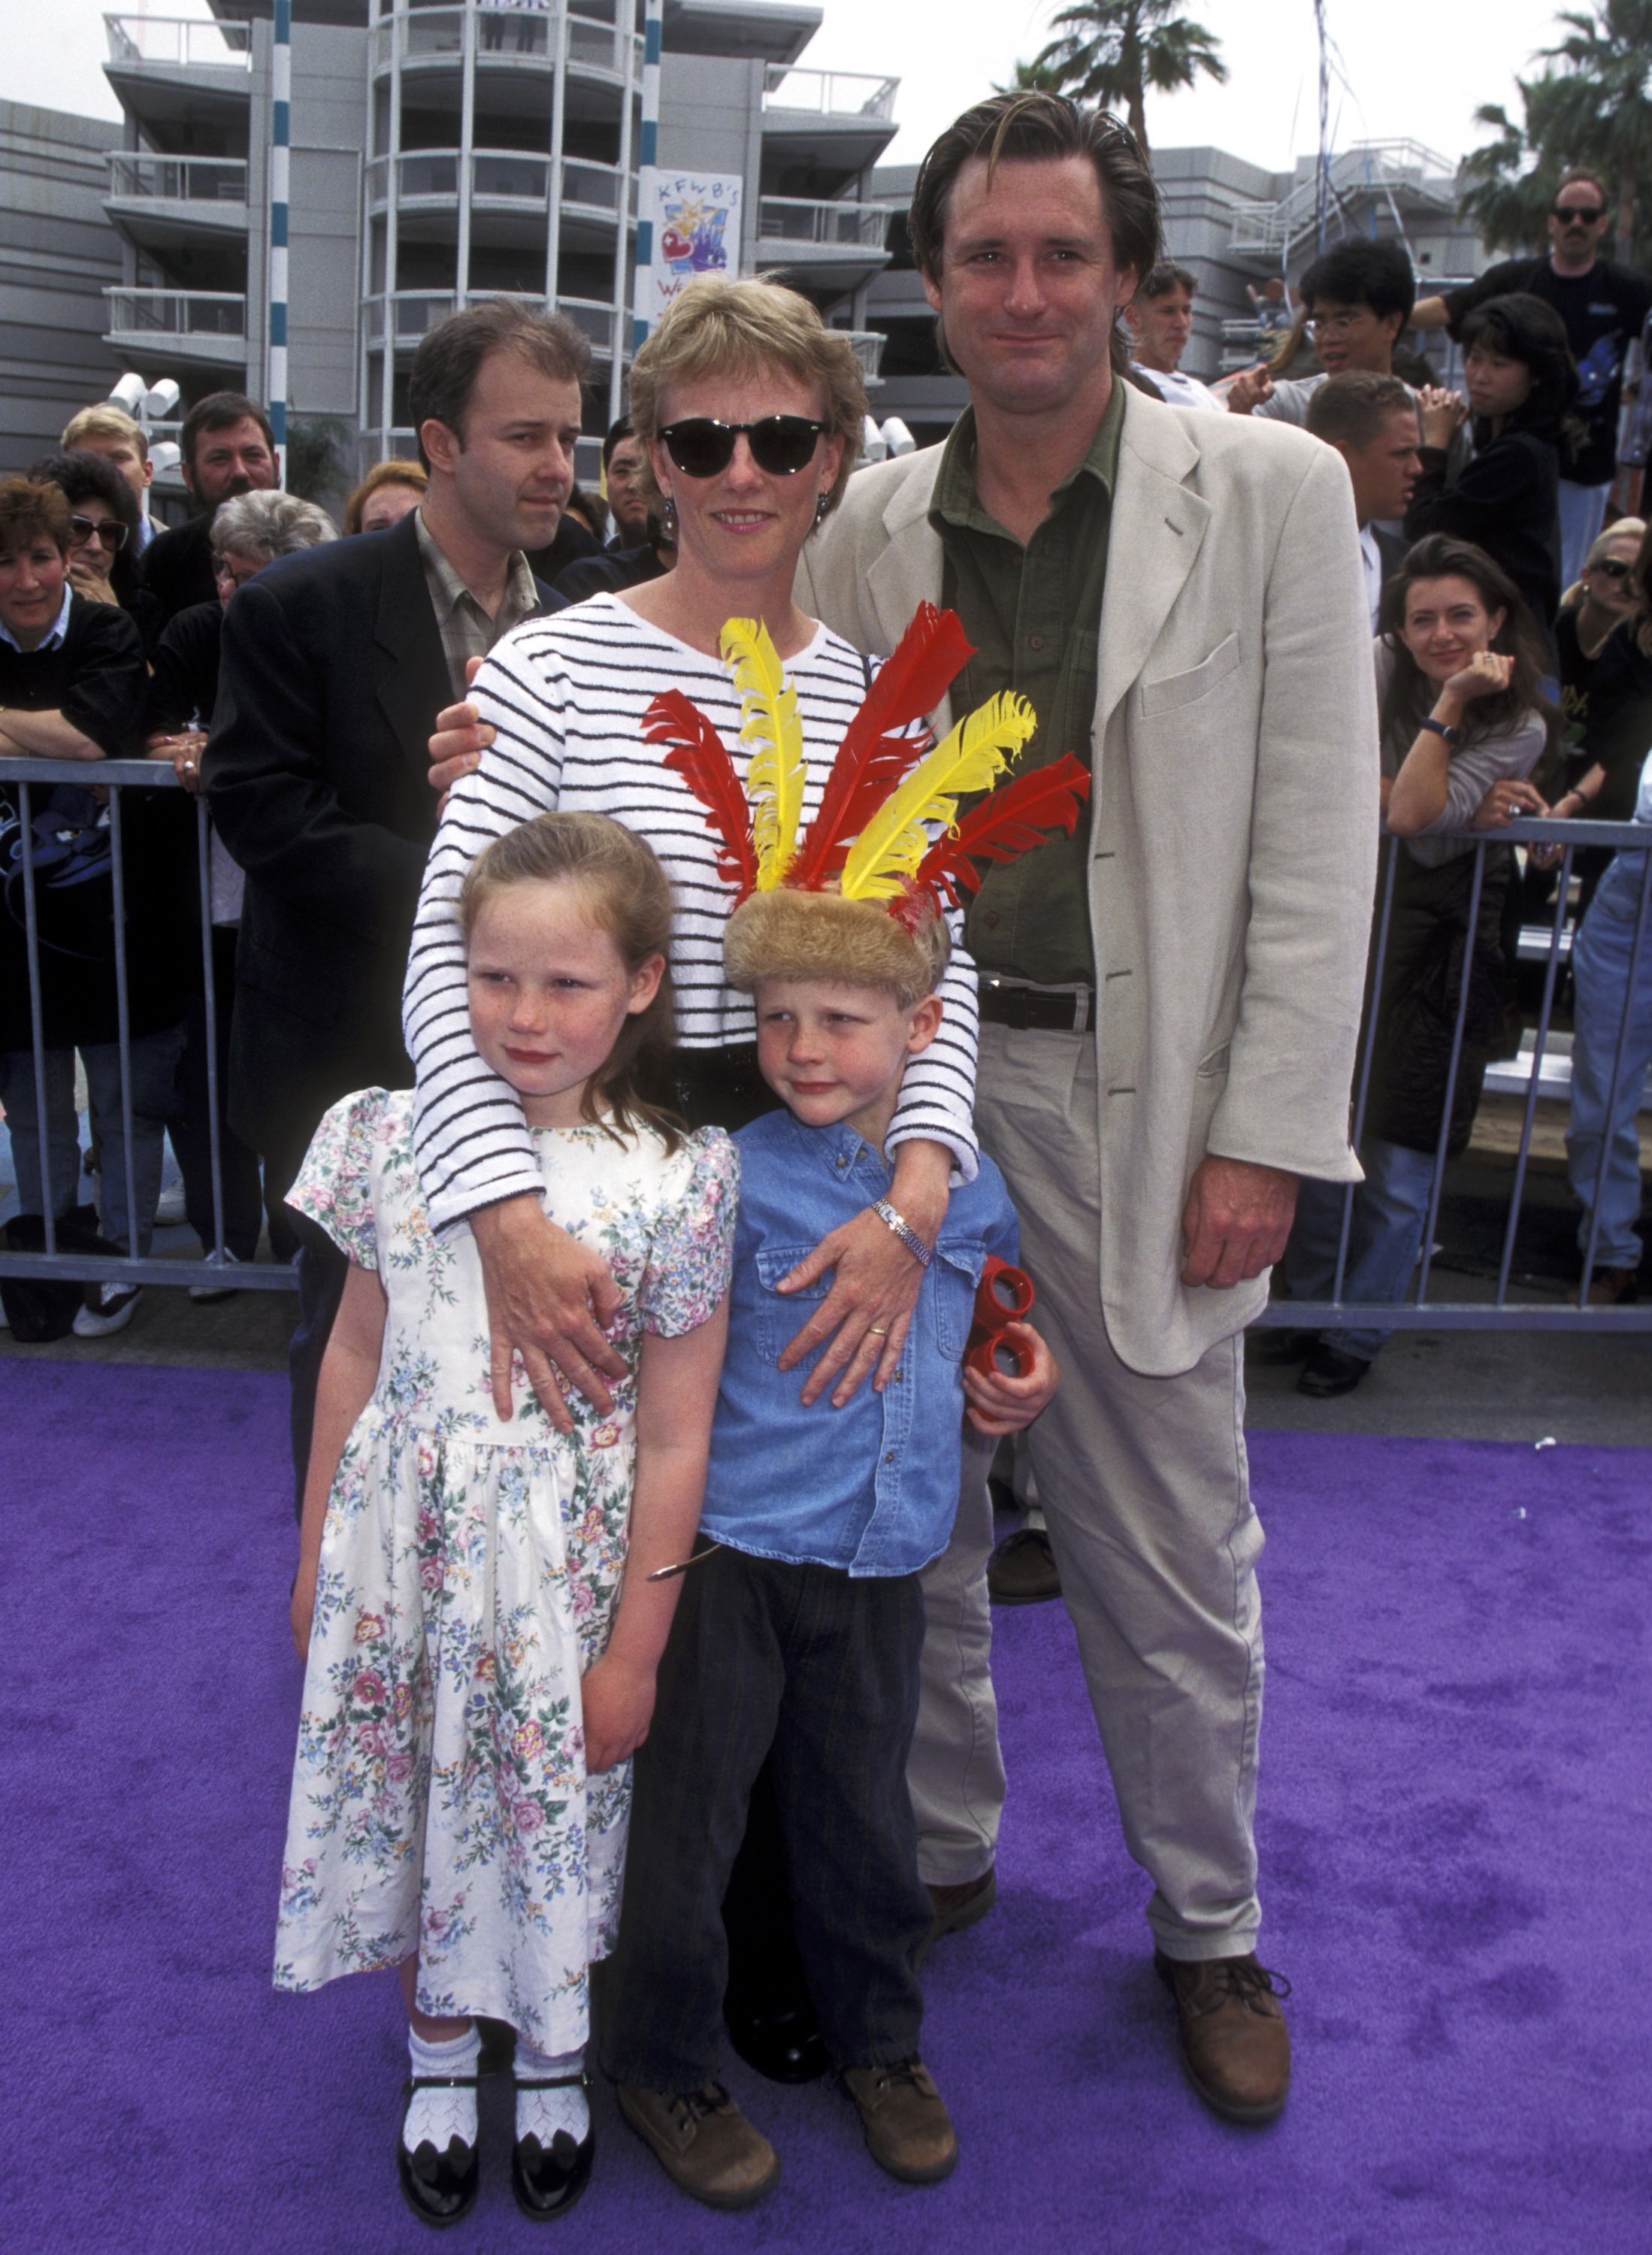 Bill Pullman, Tamara Hurwitz, Maesa Pullman, and Jack Pullman on May 21, 1995 at the Cinerama Dome Theater in Universal City, California | Source: Getty Images